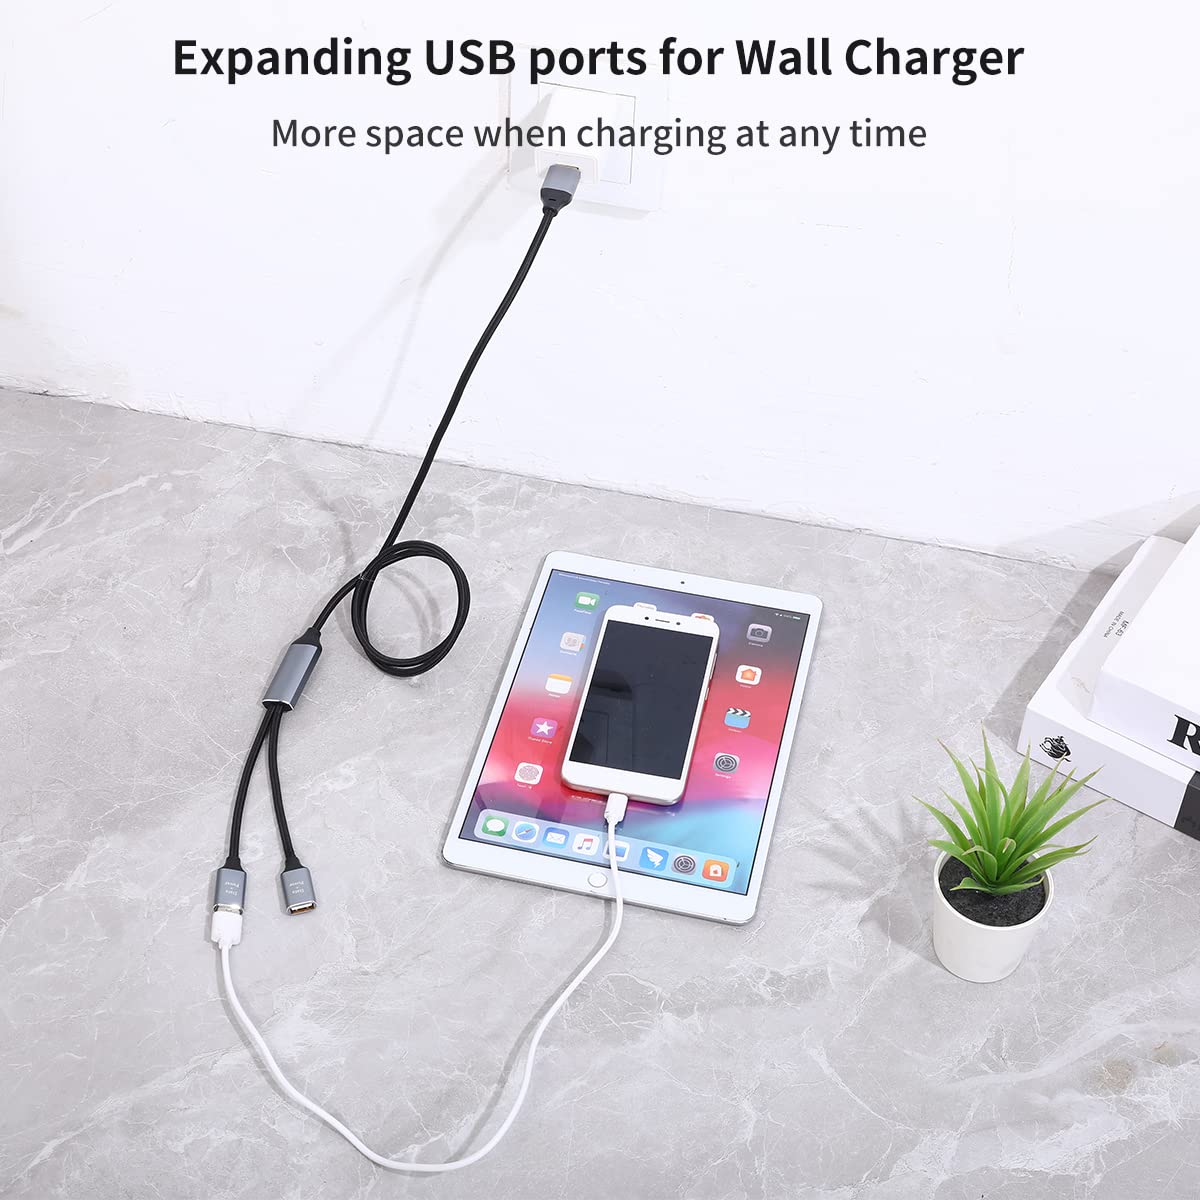 belipro USB 3.0 Splitter Y Cable 3Ft, USB 1 Male to 2 Female Connector, Data and Charger Power Splitter Adapter for Mac, Laptop, Printer, and More USB-Enabled Devices.Grey